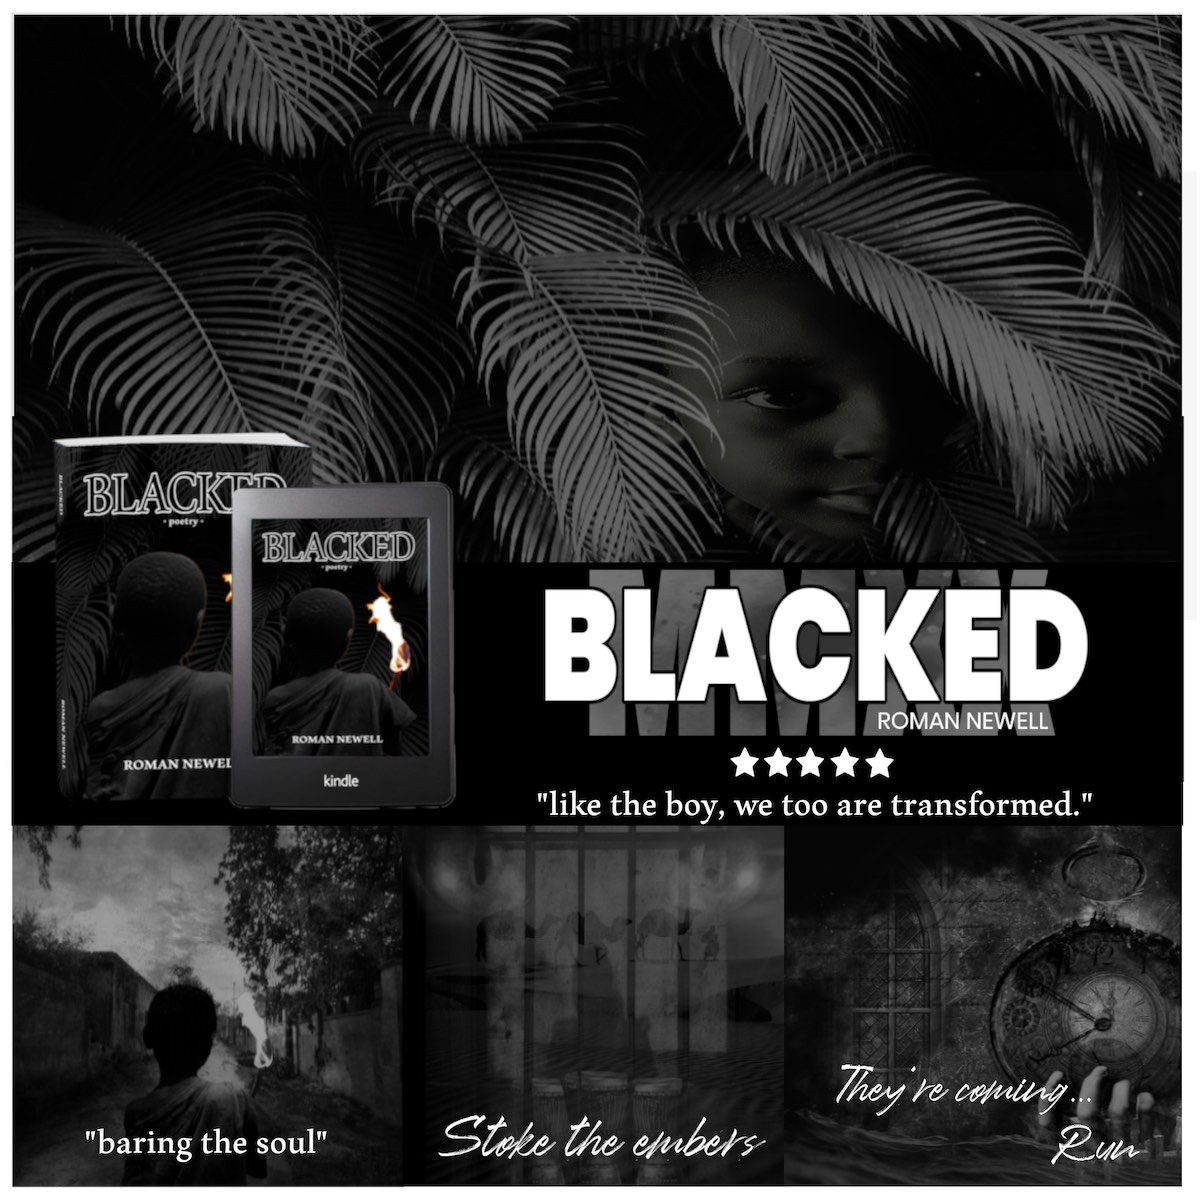 My reviewed thoughts on 
BLACKED
by: Roman Newell

medium.com/@darlenecarrol…

#review #bookrecs #writing #blacked #poetry #romannewelldotcom #romannewell #darkpoetry #freeverse #whatareyoureading #poetrycollections #thoughtsandimpressions #stoketheembers